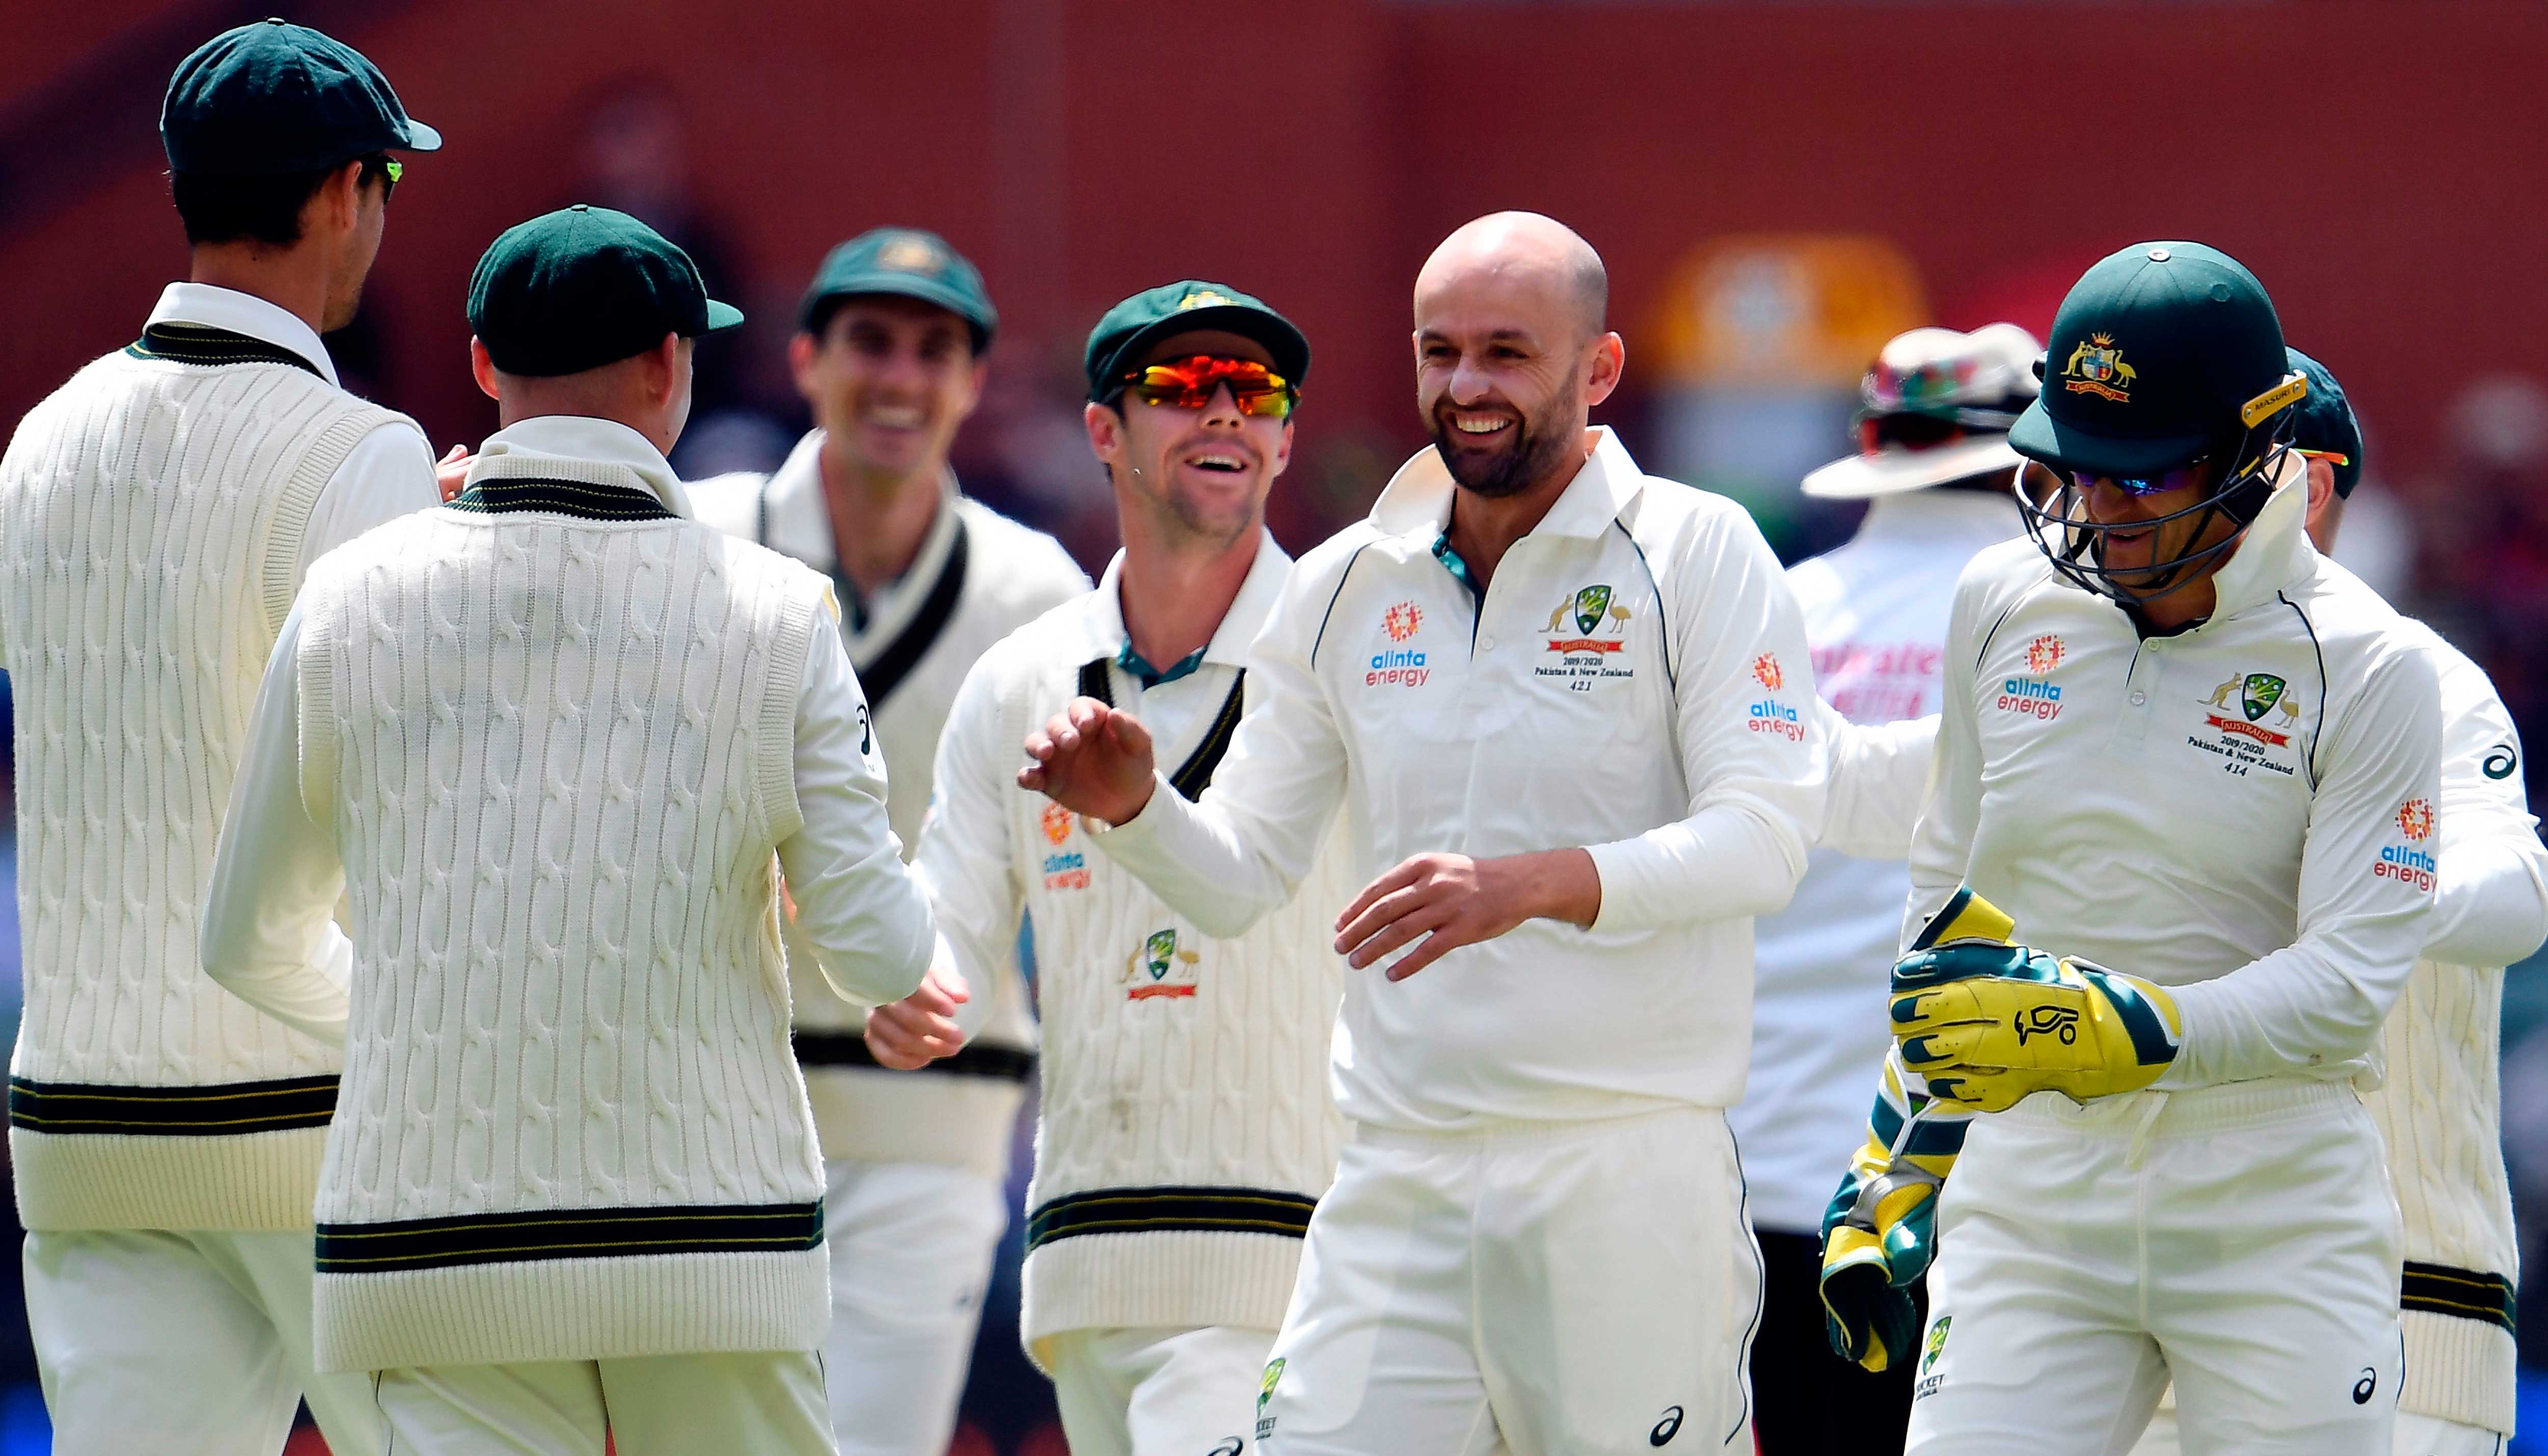 Dominant Australia inflict humiliating defeat on toothless Pakistan